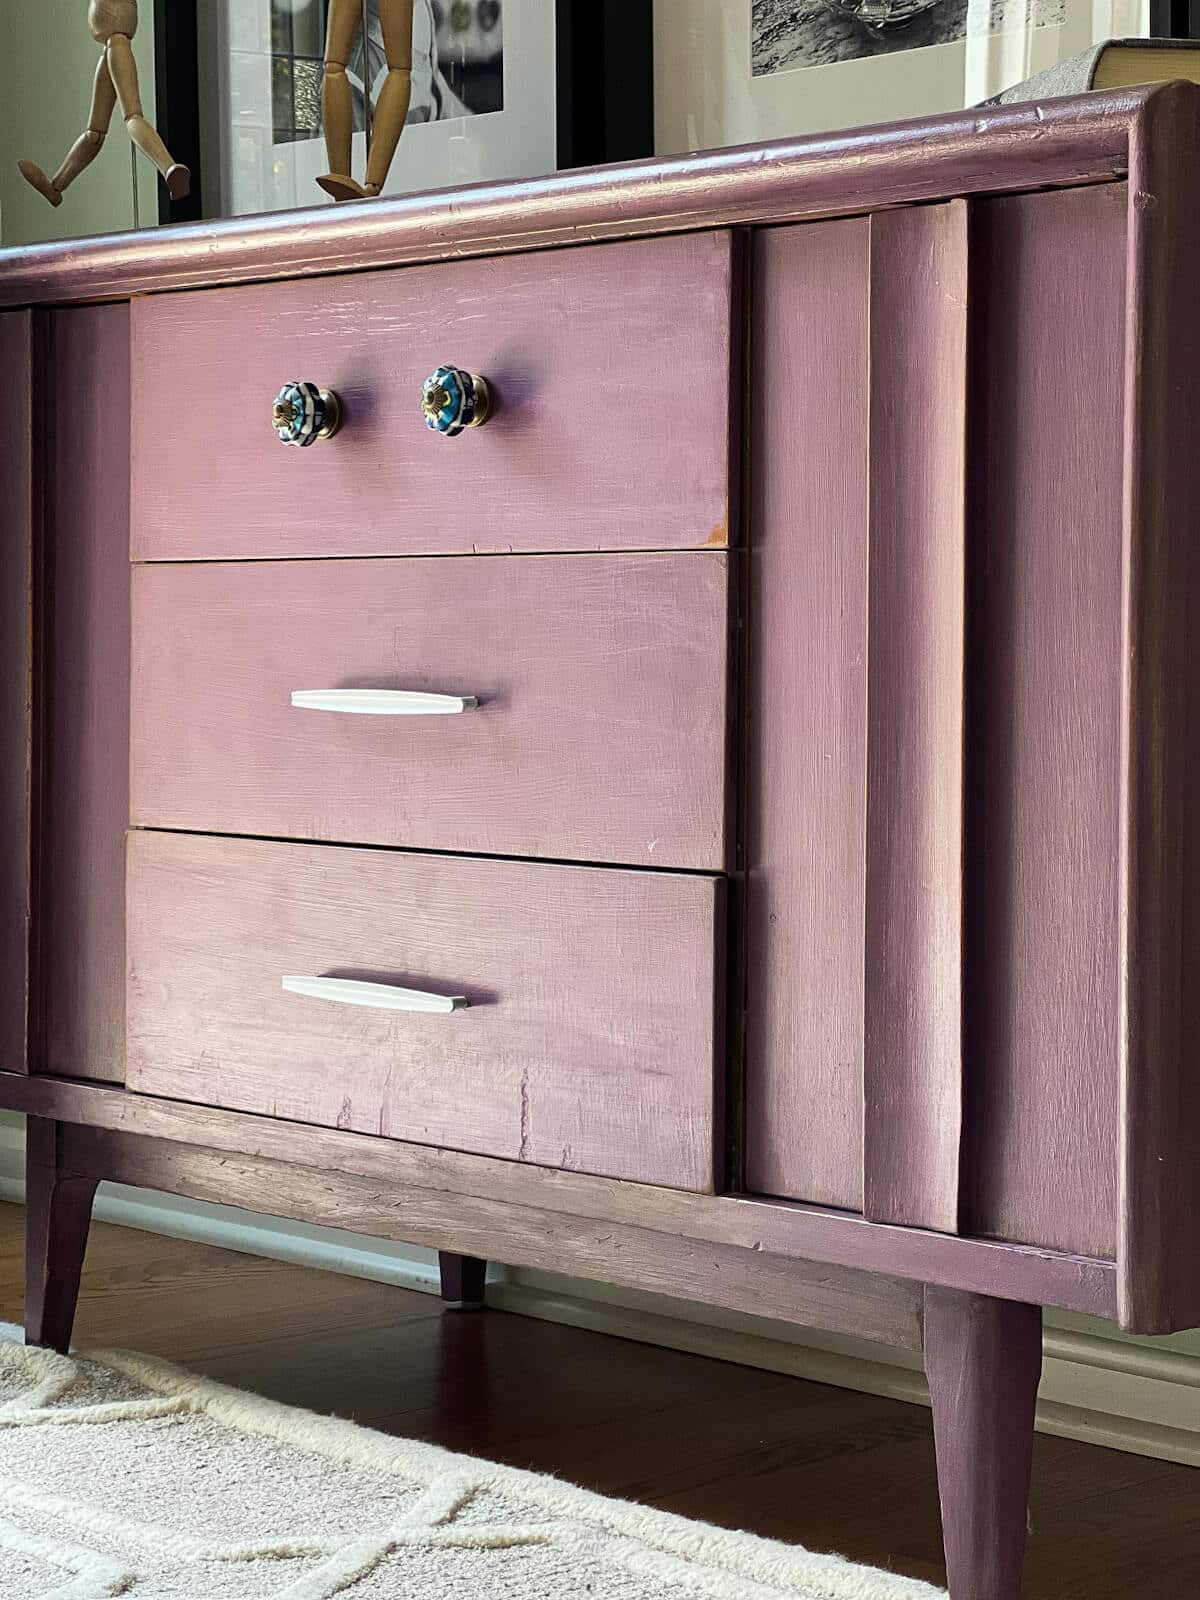 purple painted dresser with spray painted handles.